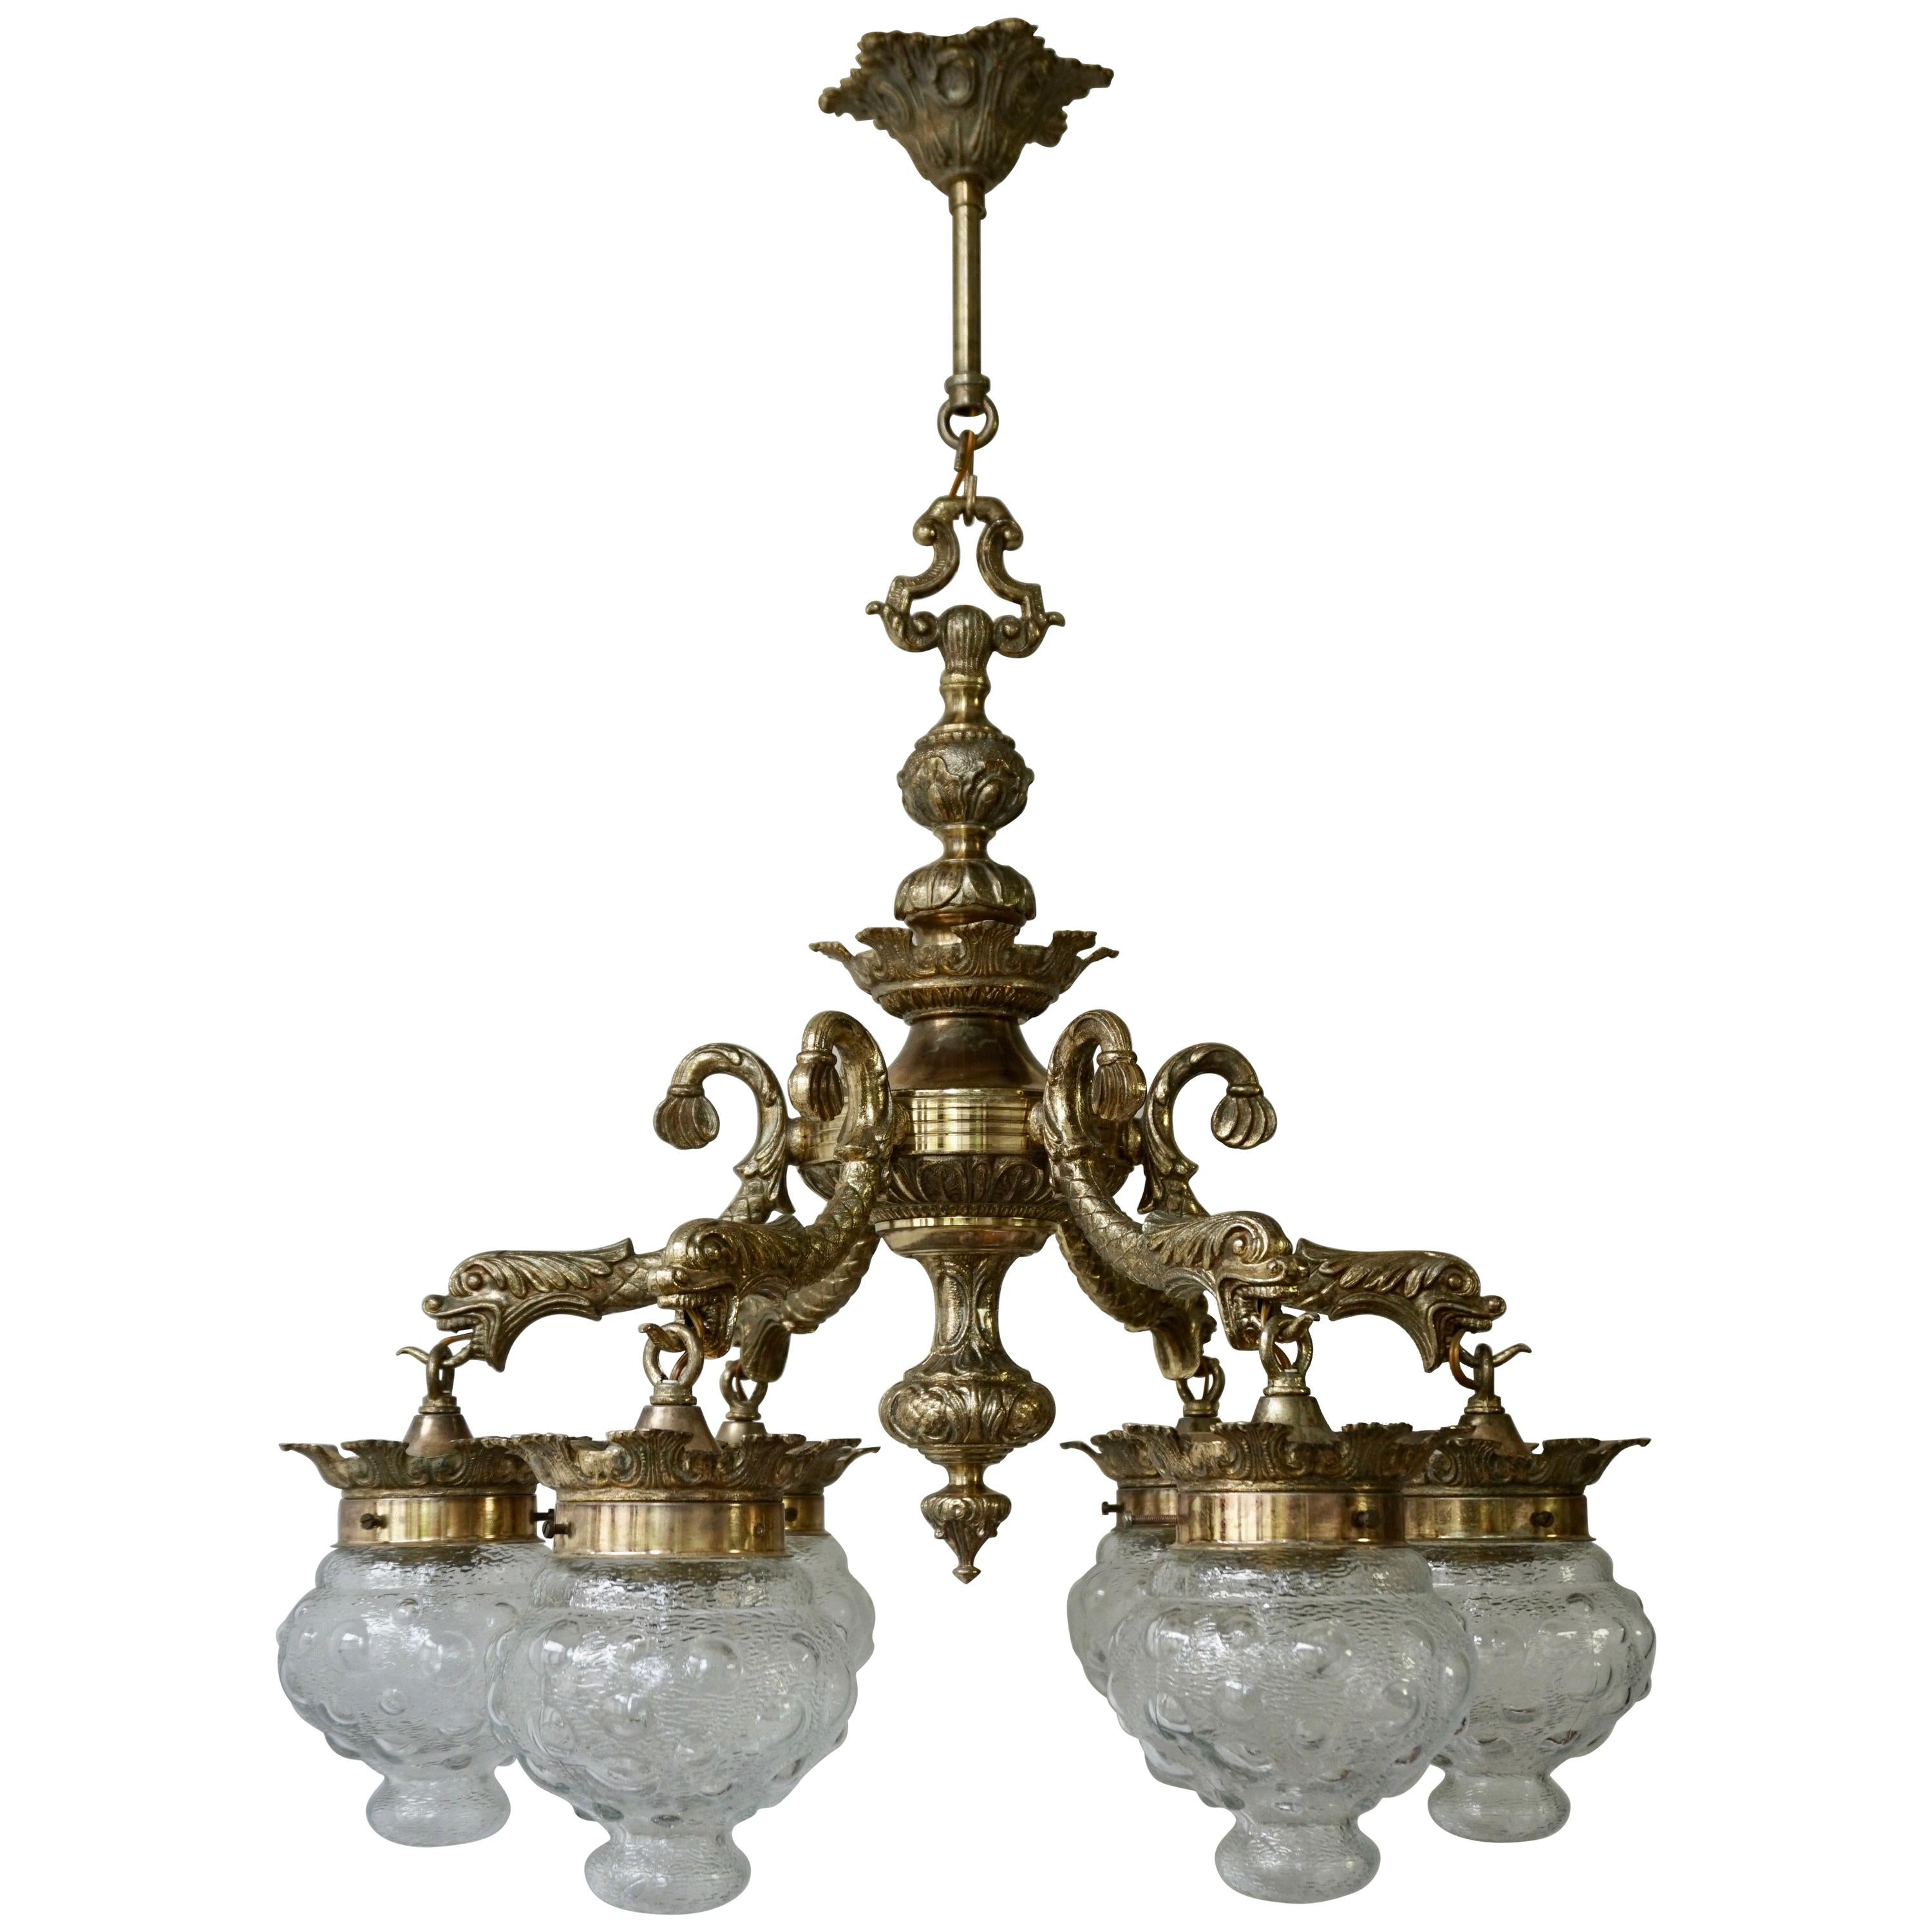 Stunning Brass Chandelier in Gothic or Medieval Style with Dragon Sculptures For Sale